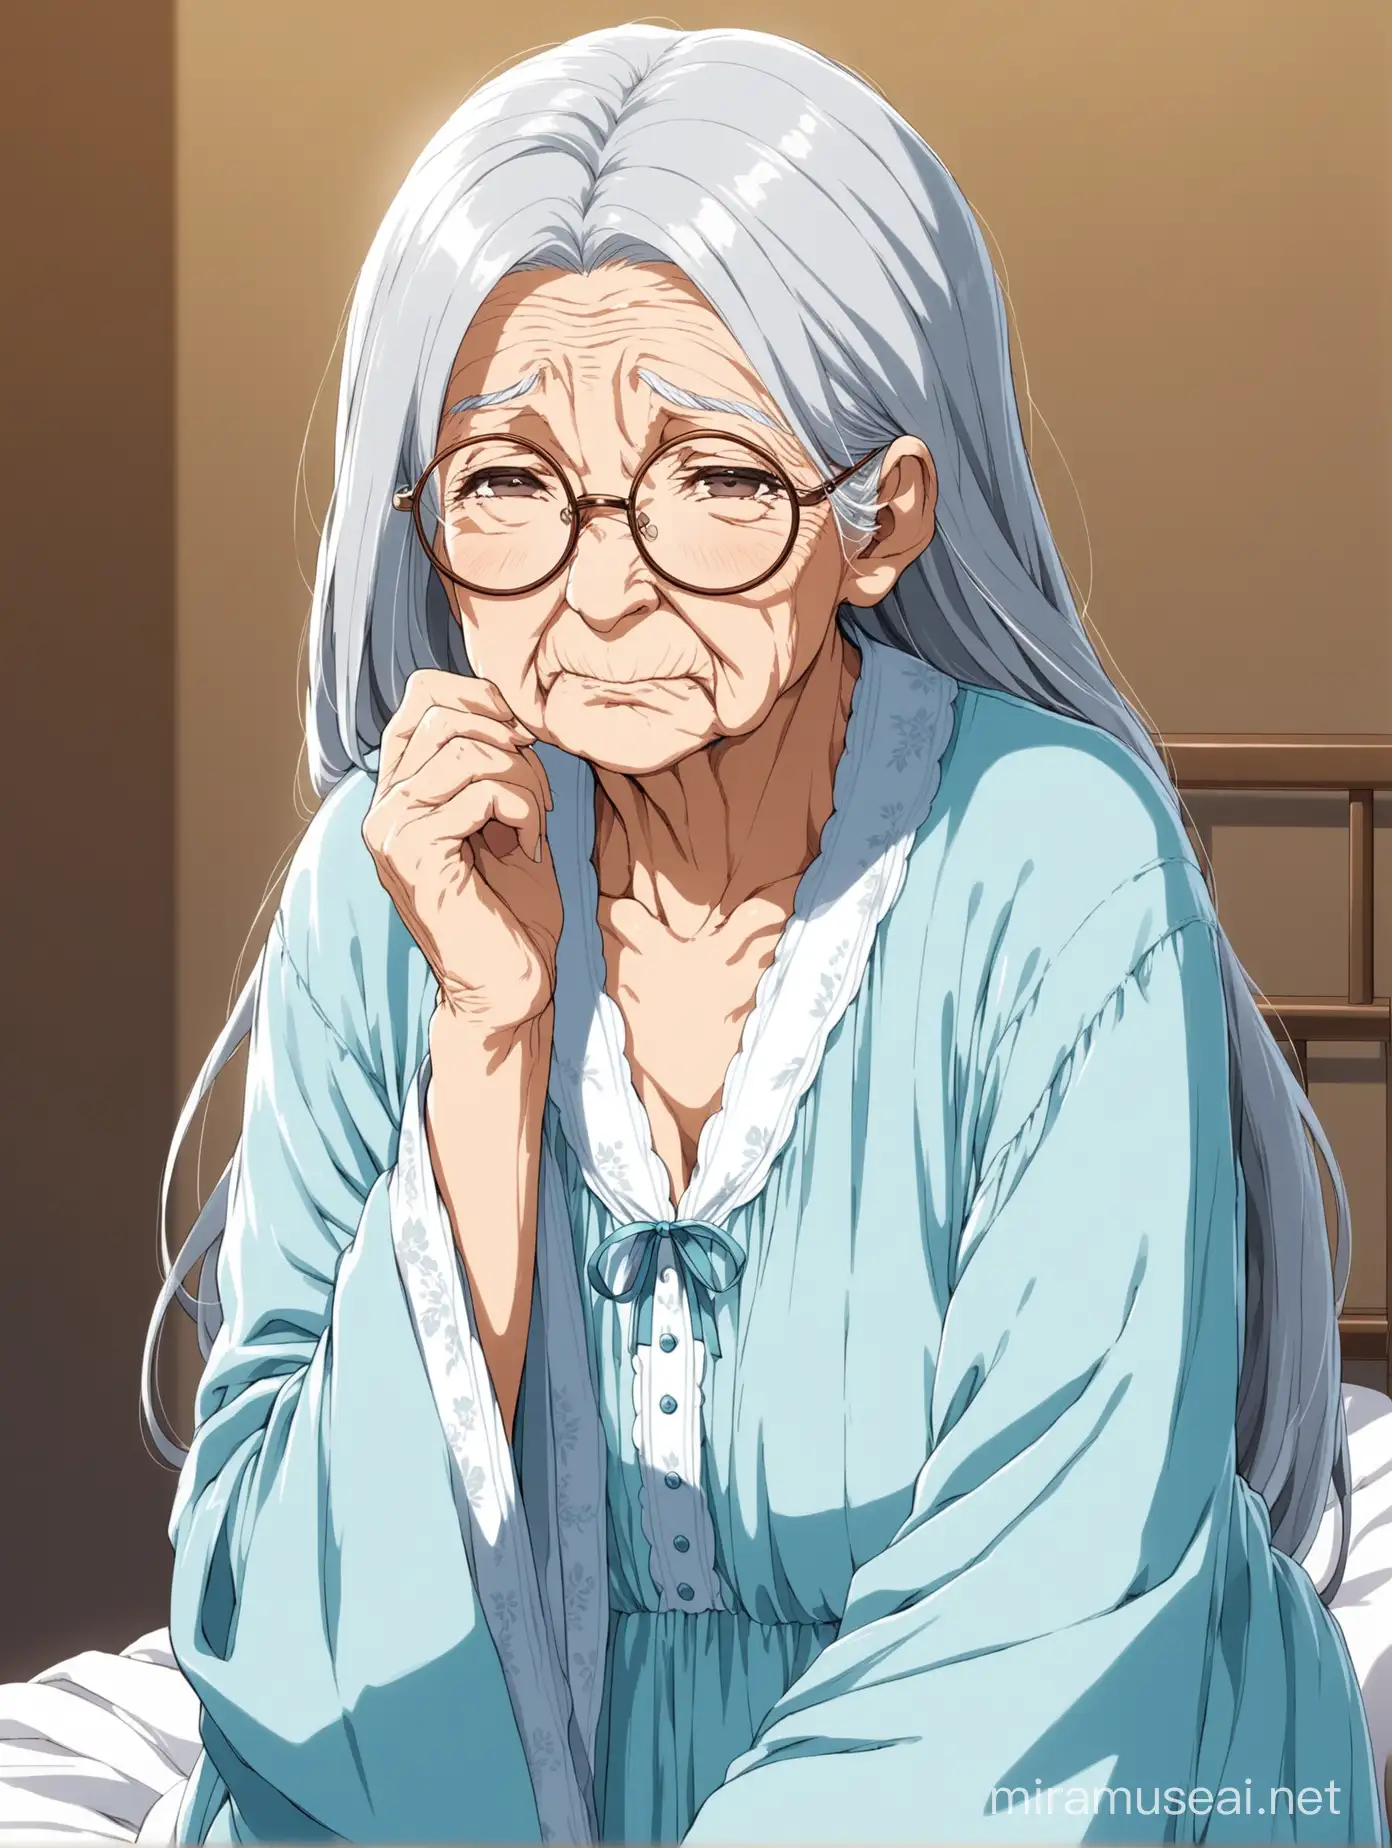 Anime, Old lady, wrinkled, with long gray hair, wearing light blue nightgown, white shawl, round glasses.